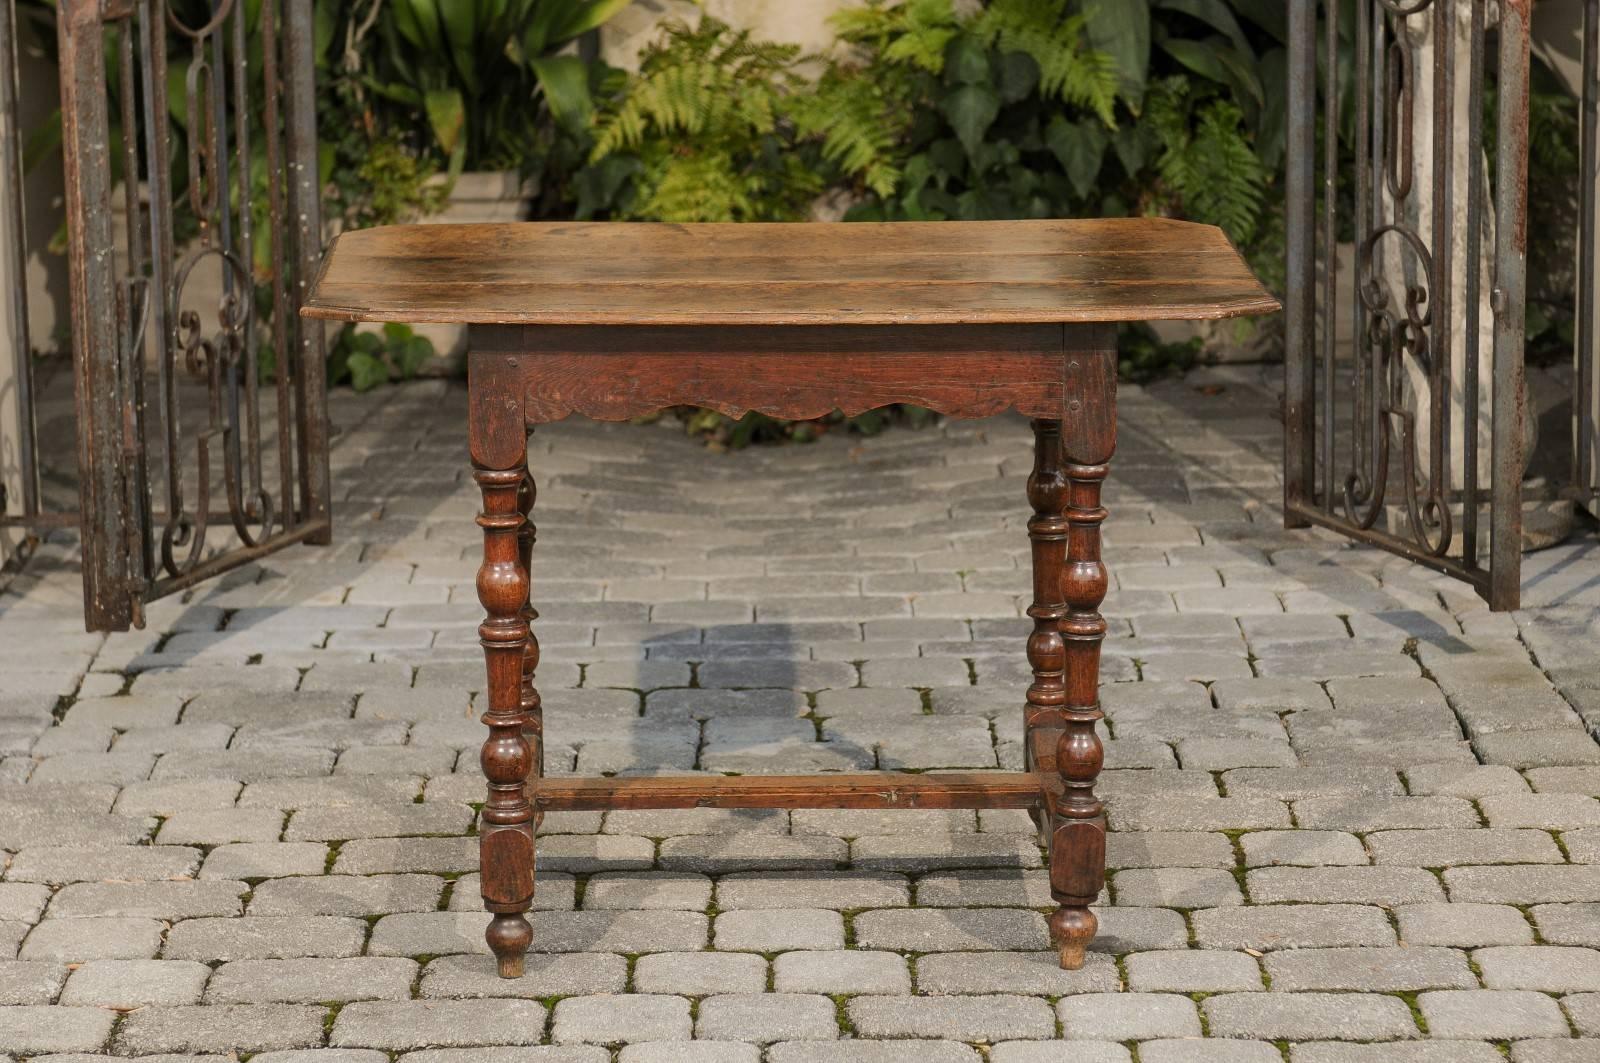 A French oak side table with turned legs and cross stretcher from the late 18th century. This French side table features a rectangular top with canted corners sitting above a nicely carved apron. The table is raised on four turned legs resting on